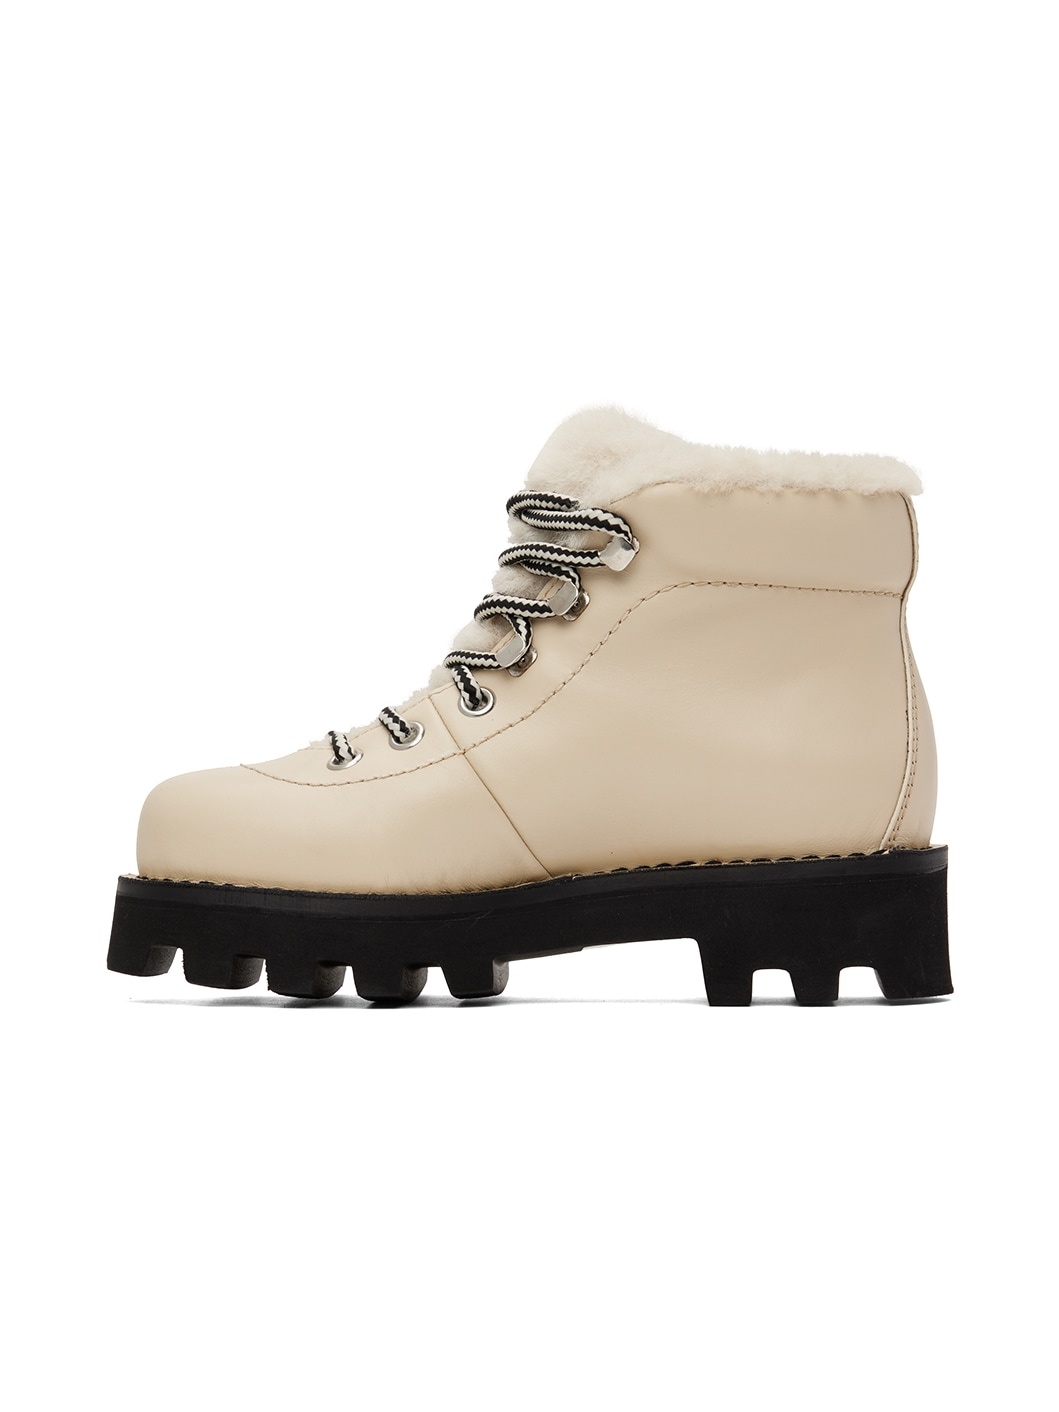 Beige Shearling Hiking Boots - 3